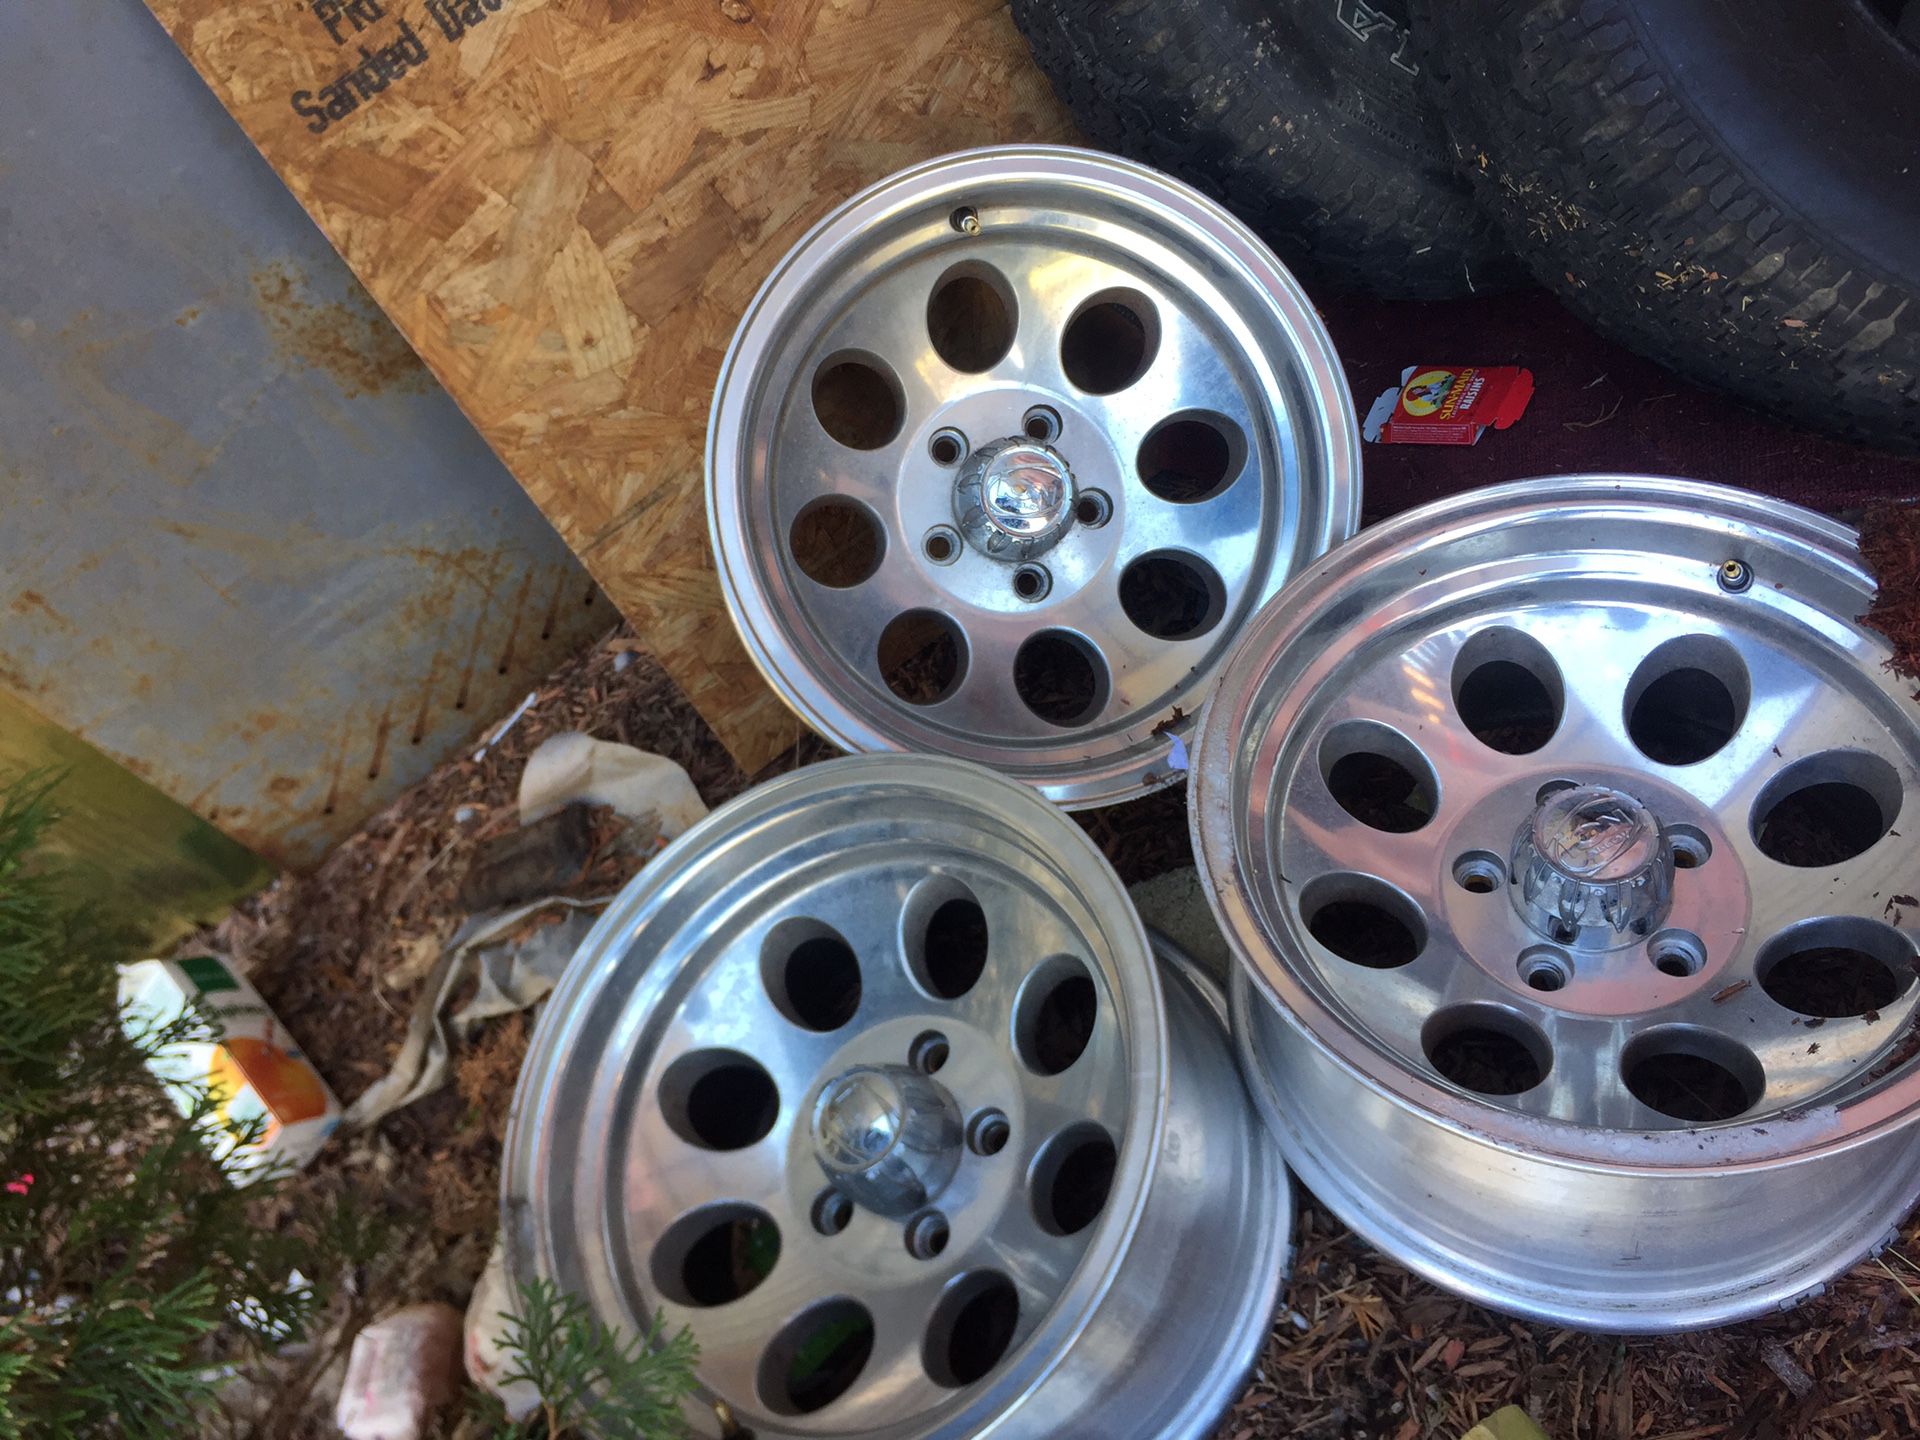 15” alloy ion wheels with 2 wrangler and 2 goodyear tires